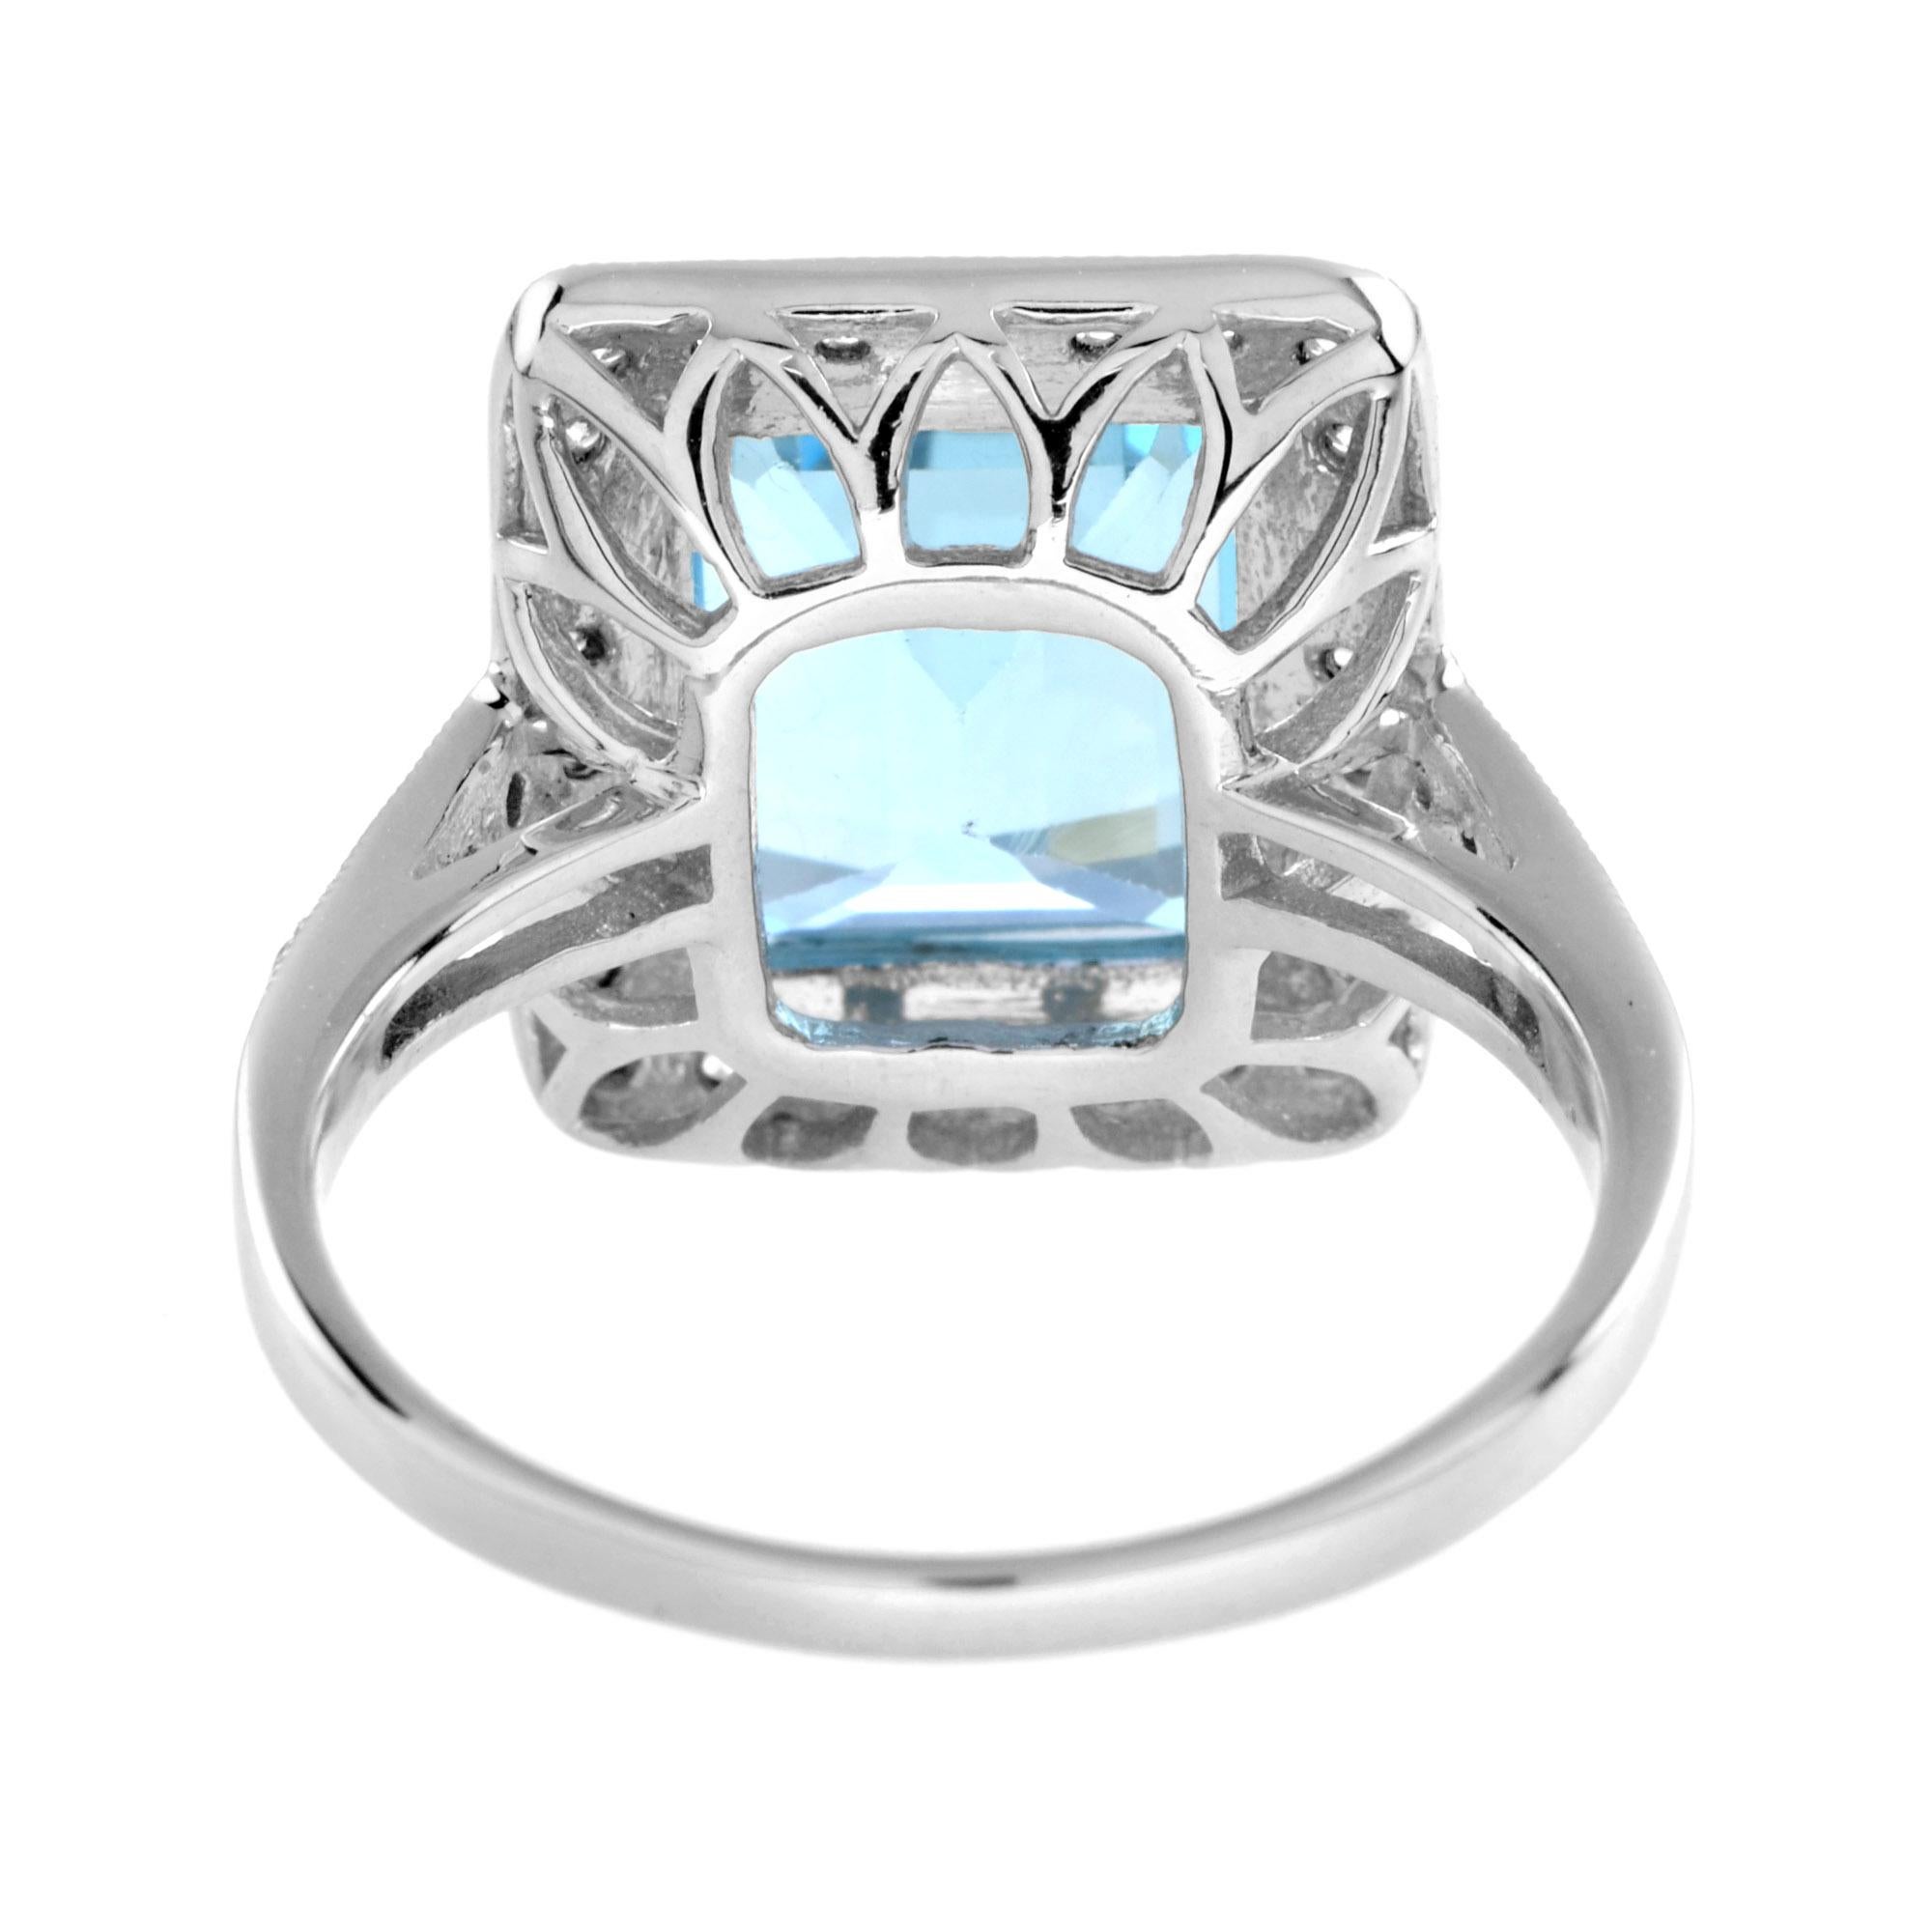 For Sale:  Halona Art Deco Style Emerald Cut Blue Topaz with Diamond Engagement Ring 4